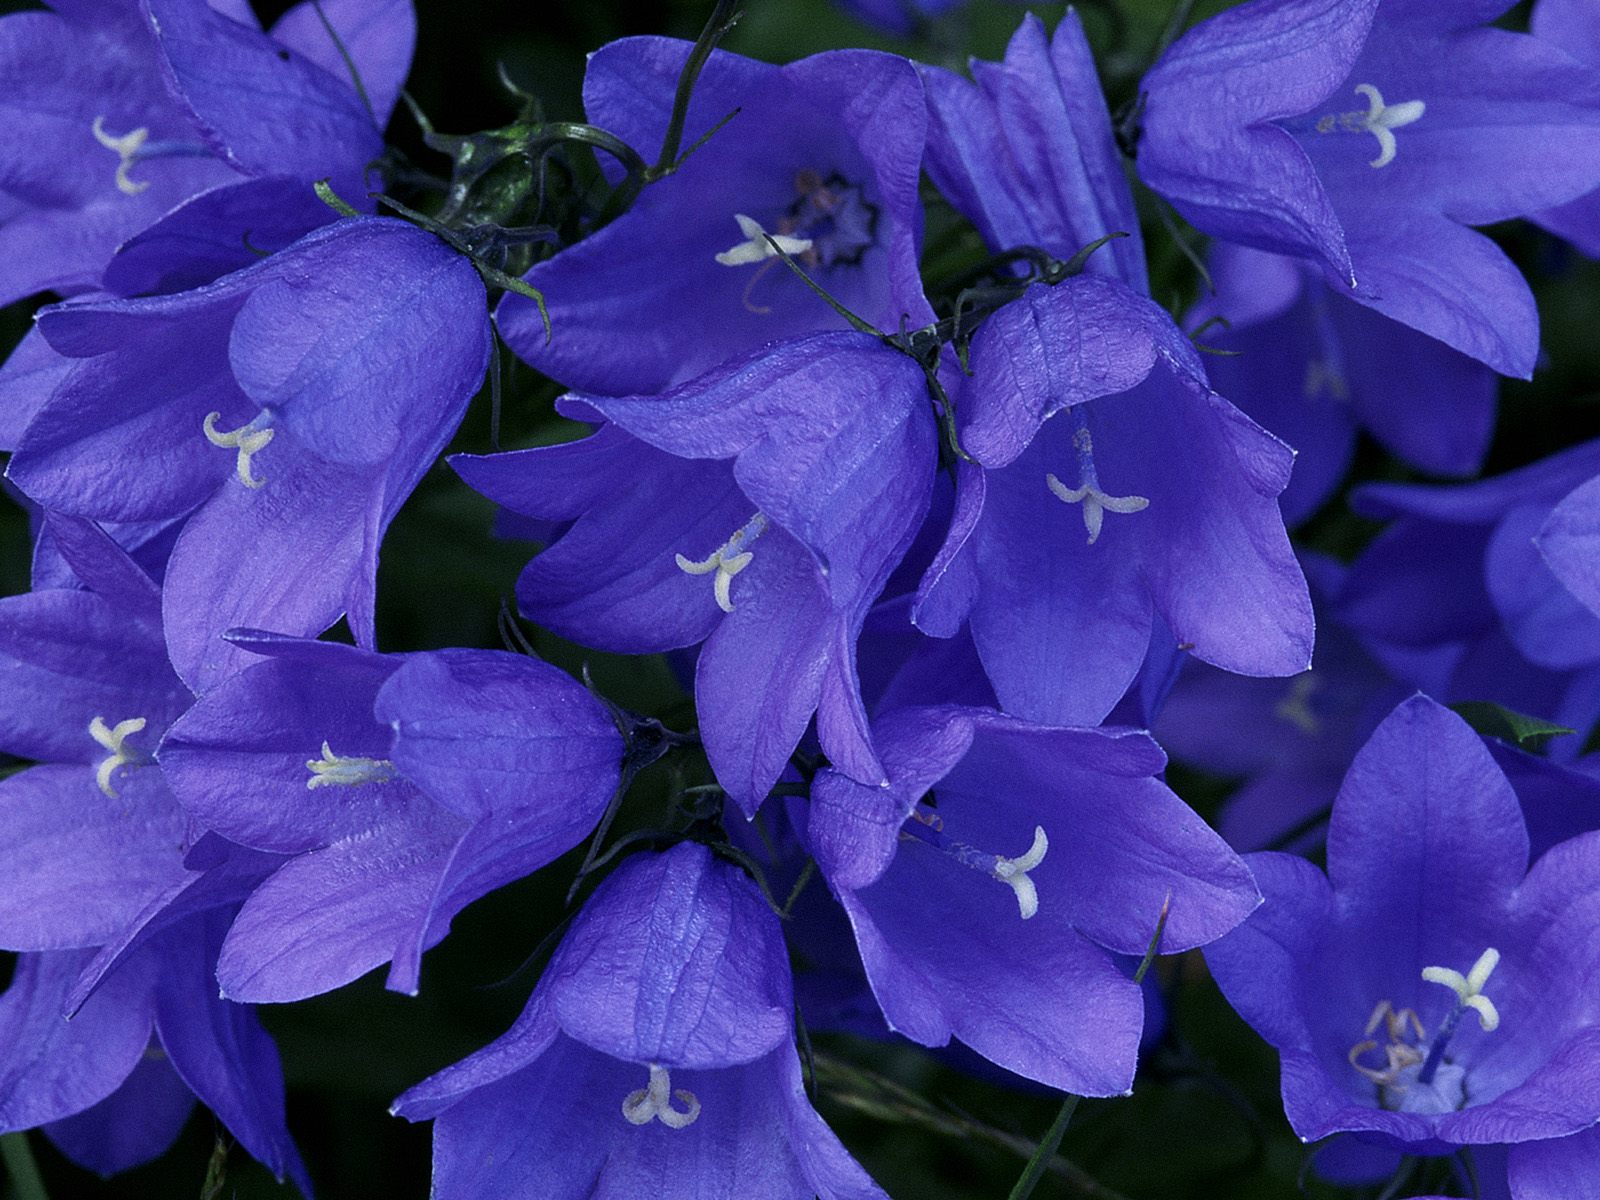 Blue Bells - a beautiful blue flower engulfed in nature.